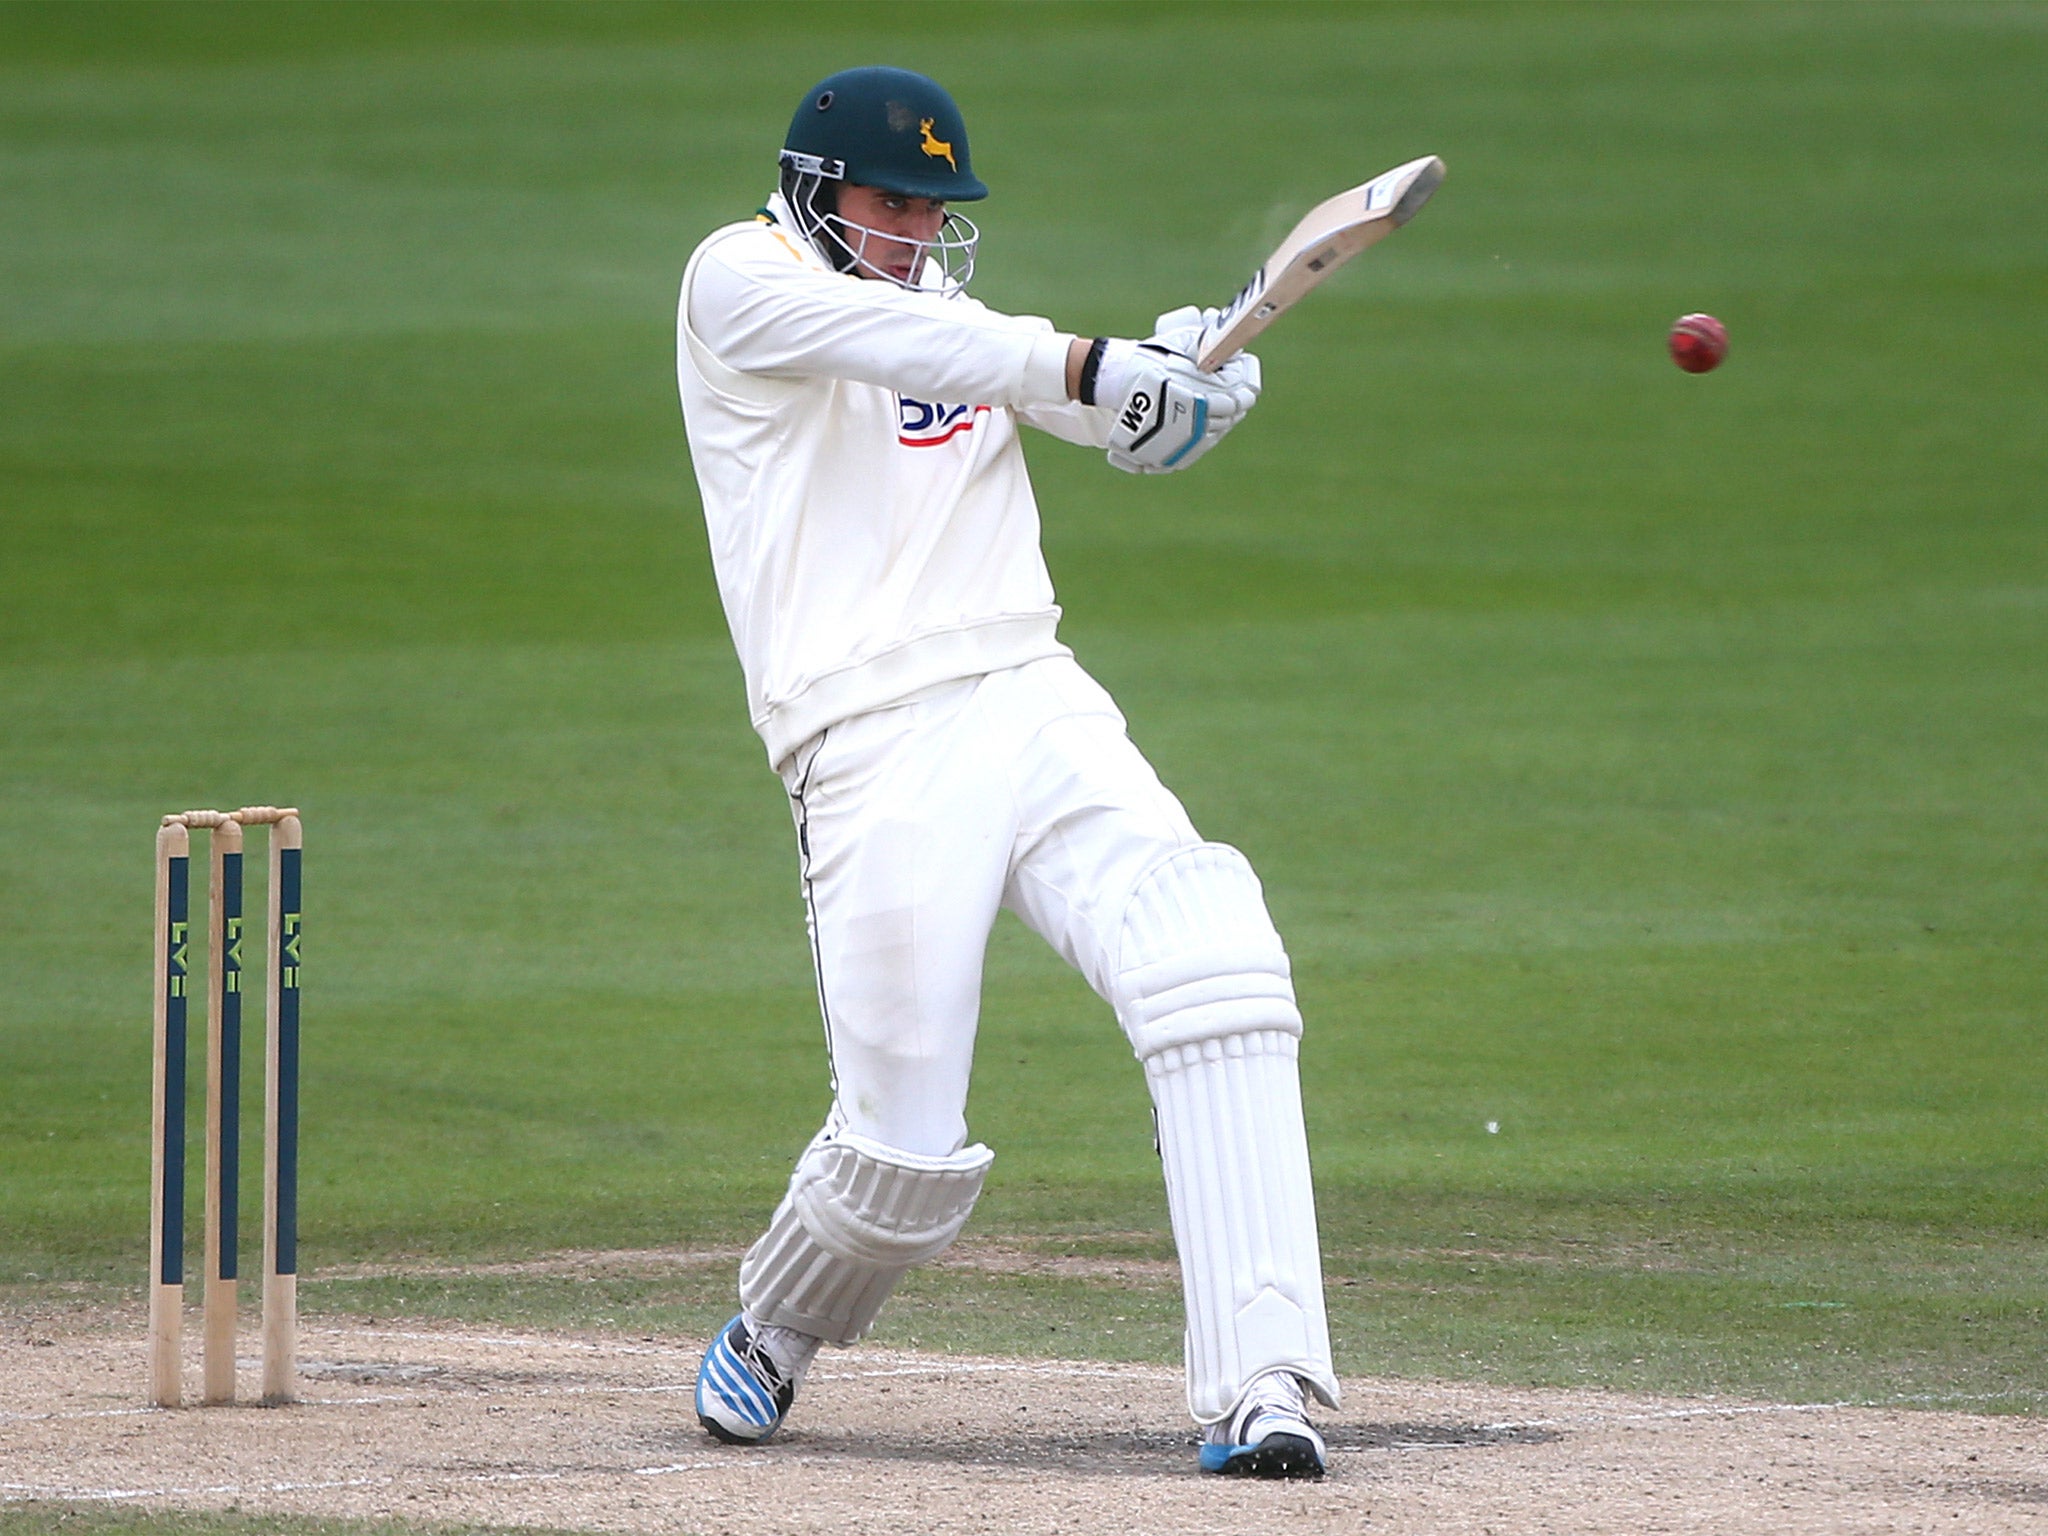 Alex Hales launches another huge hit for Notts against Sussex on his way to 167 from 133 balls